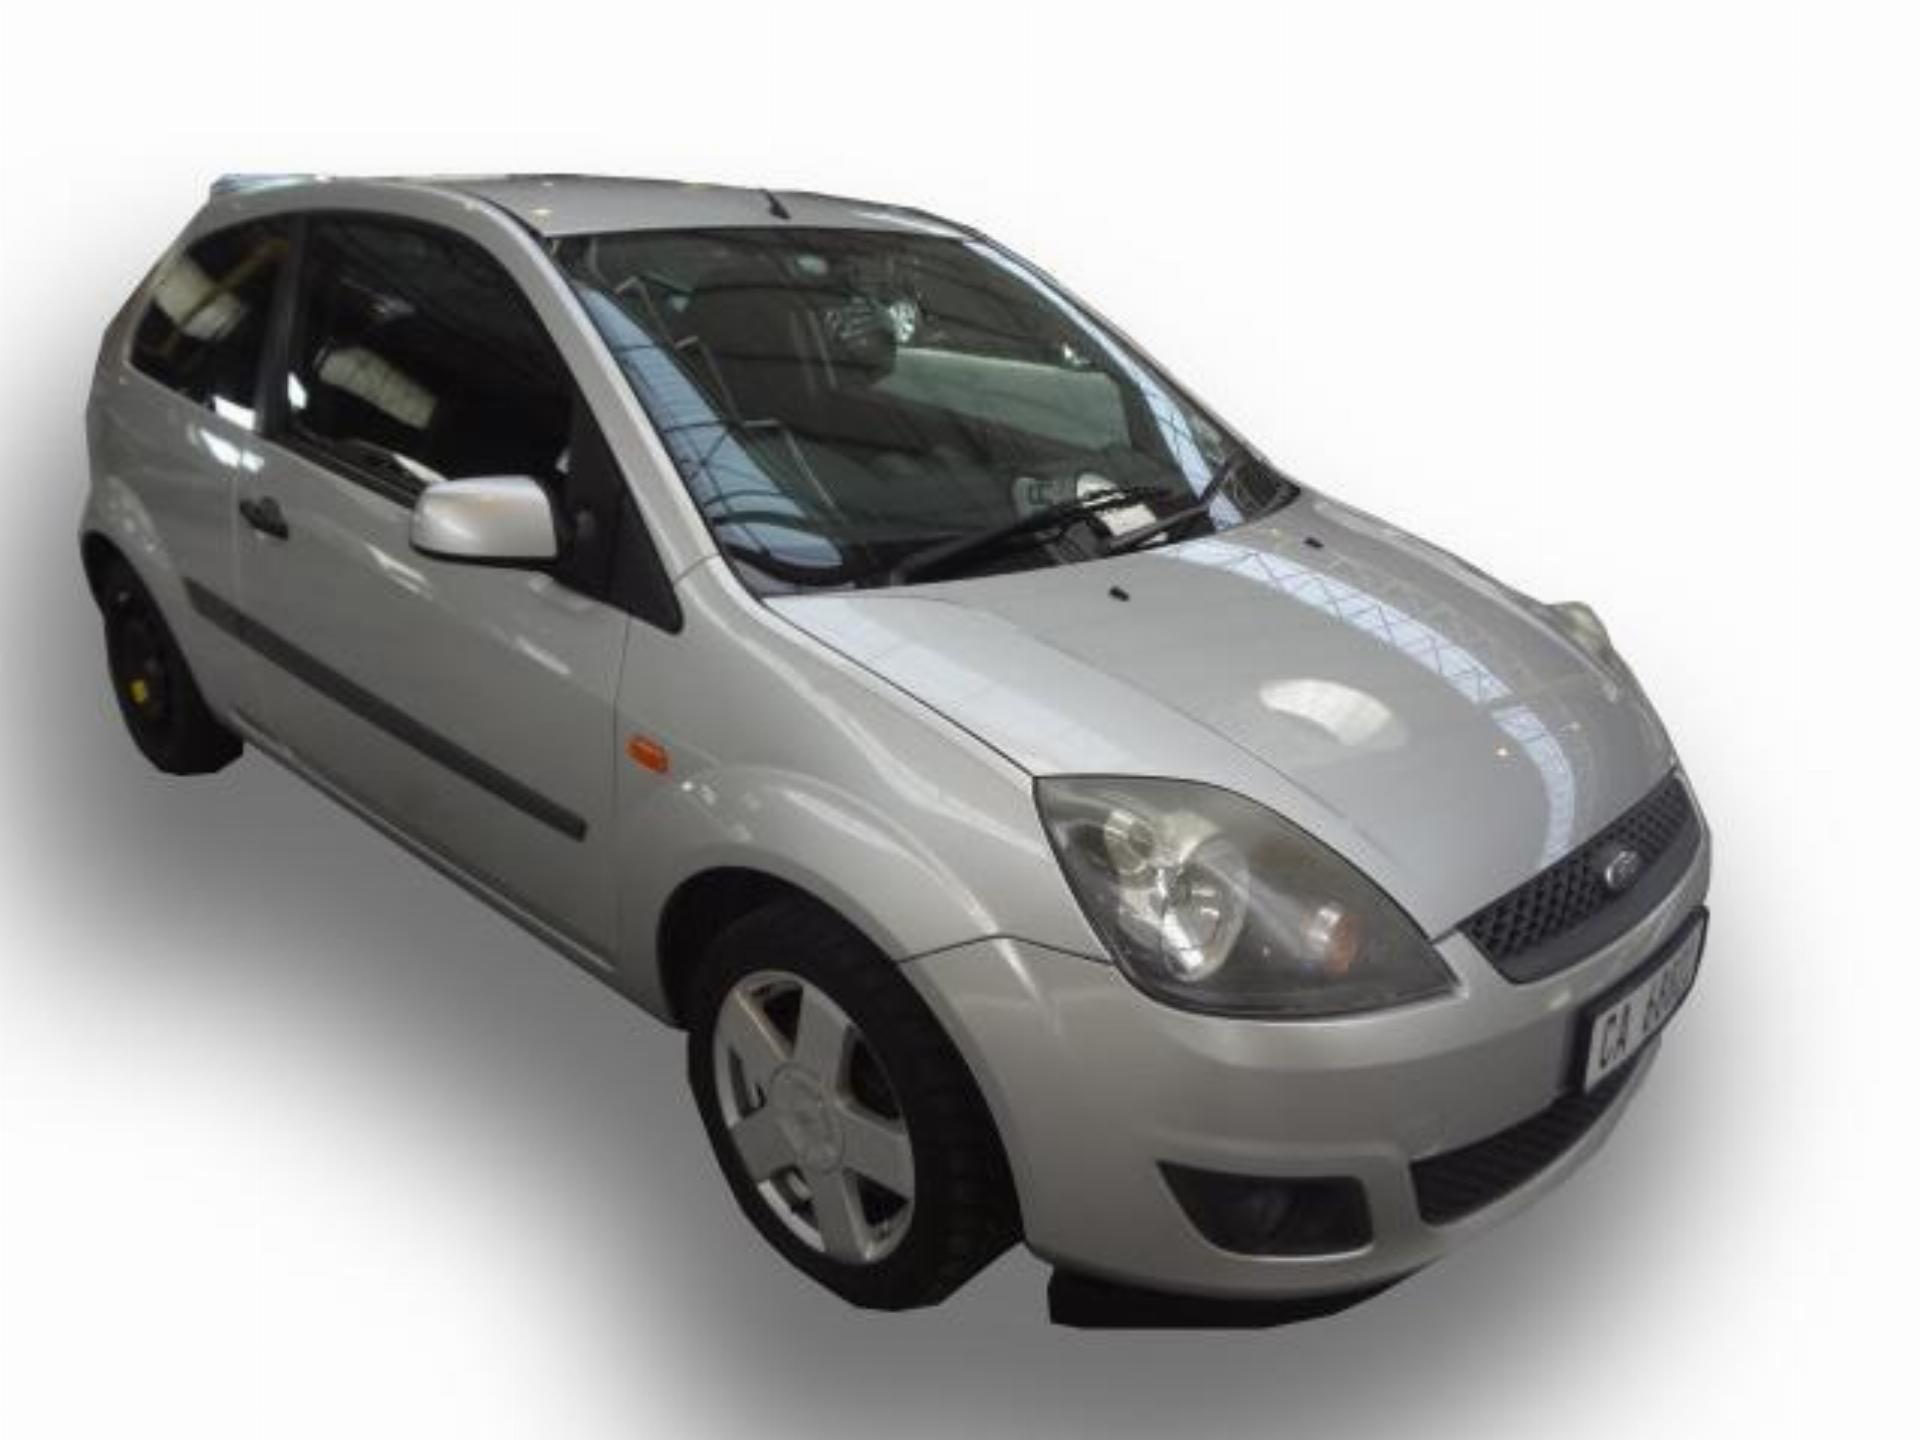 Ford Fiesta 1.4I Trend 3DR